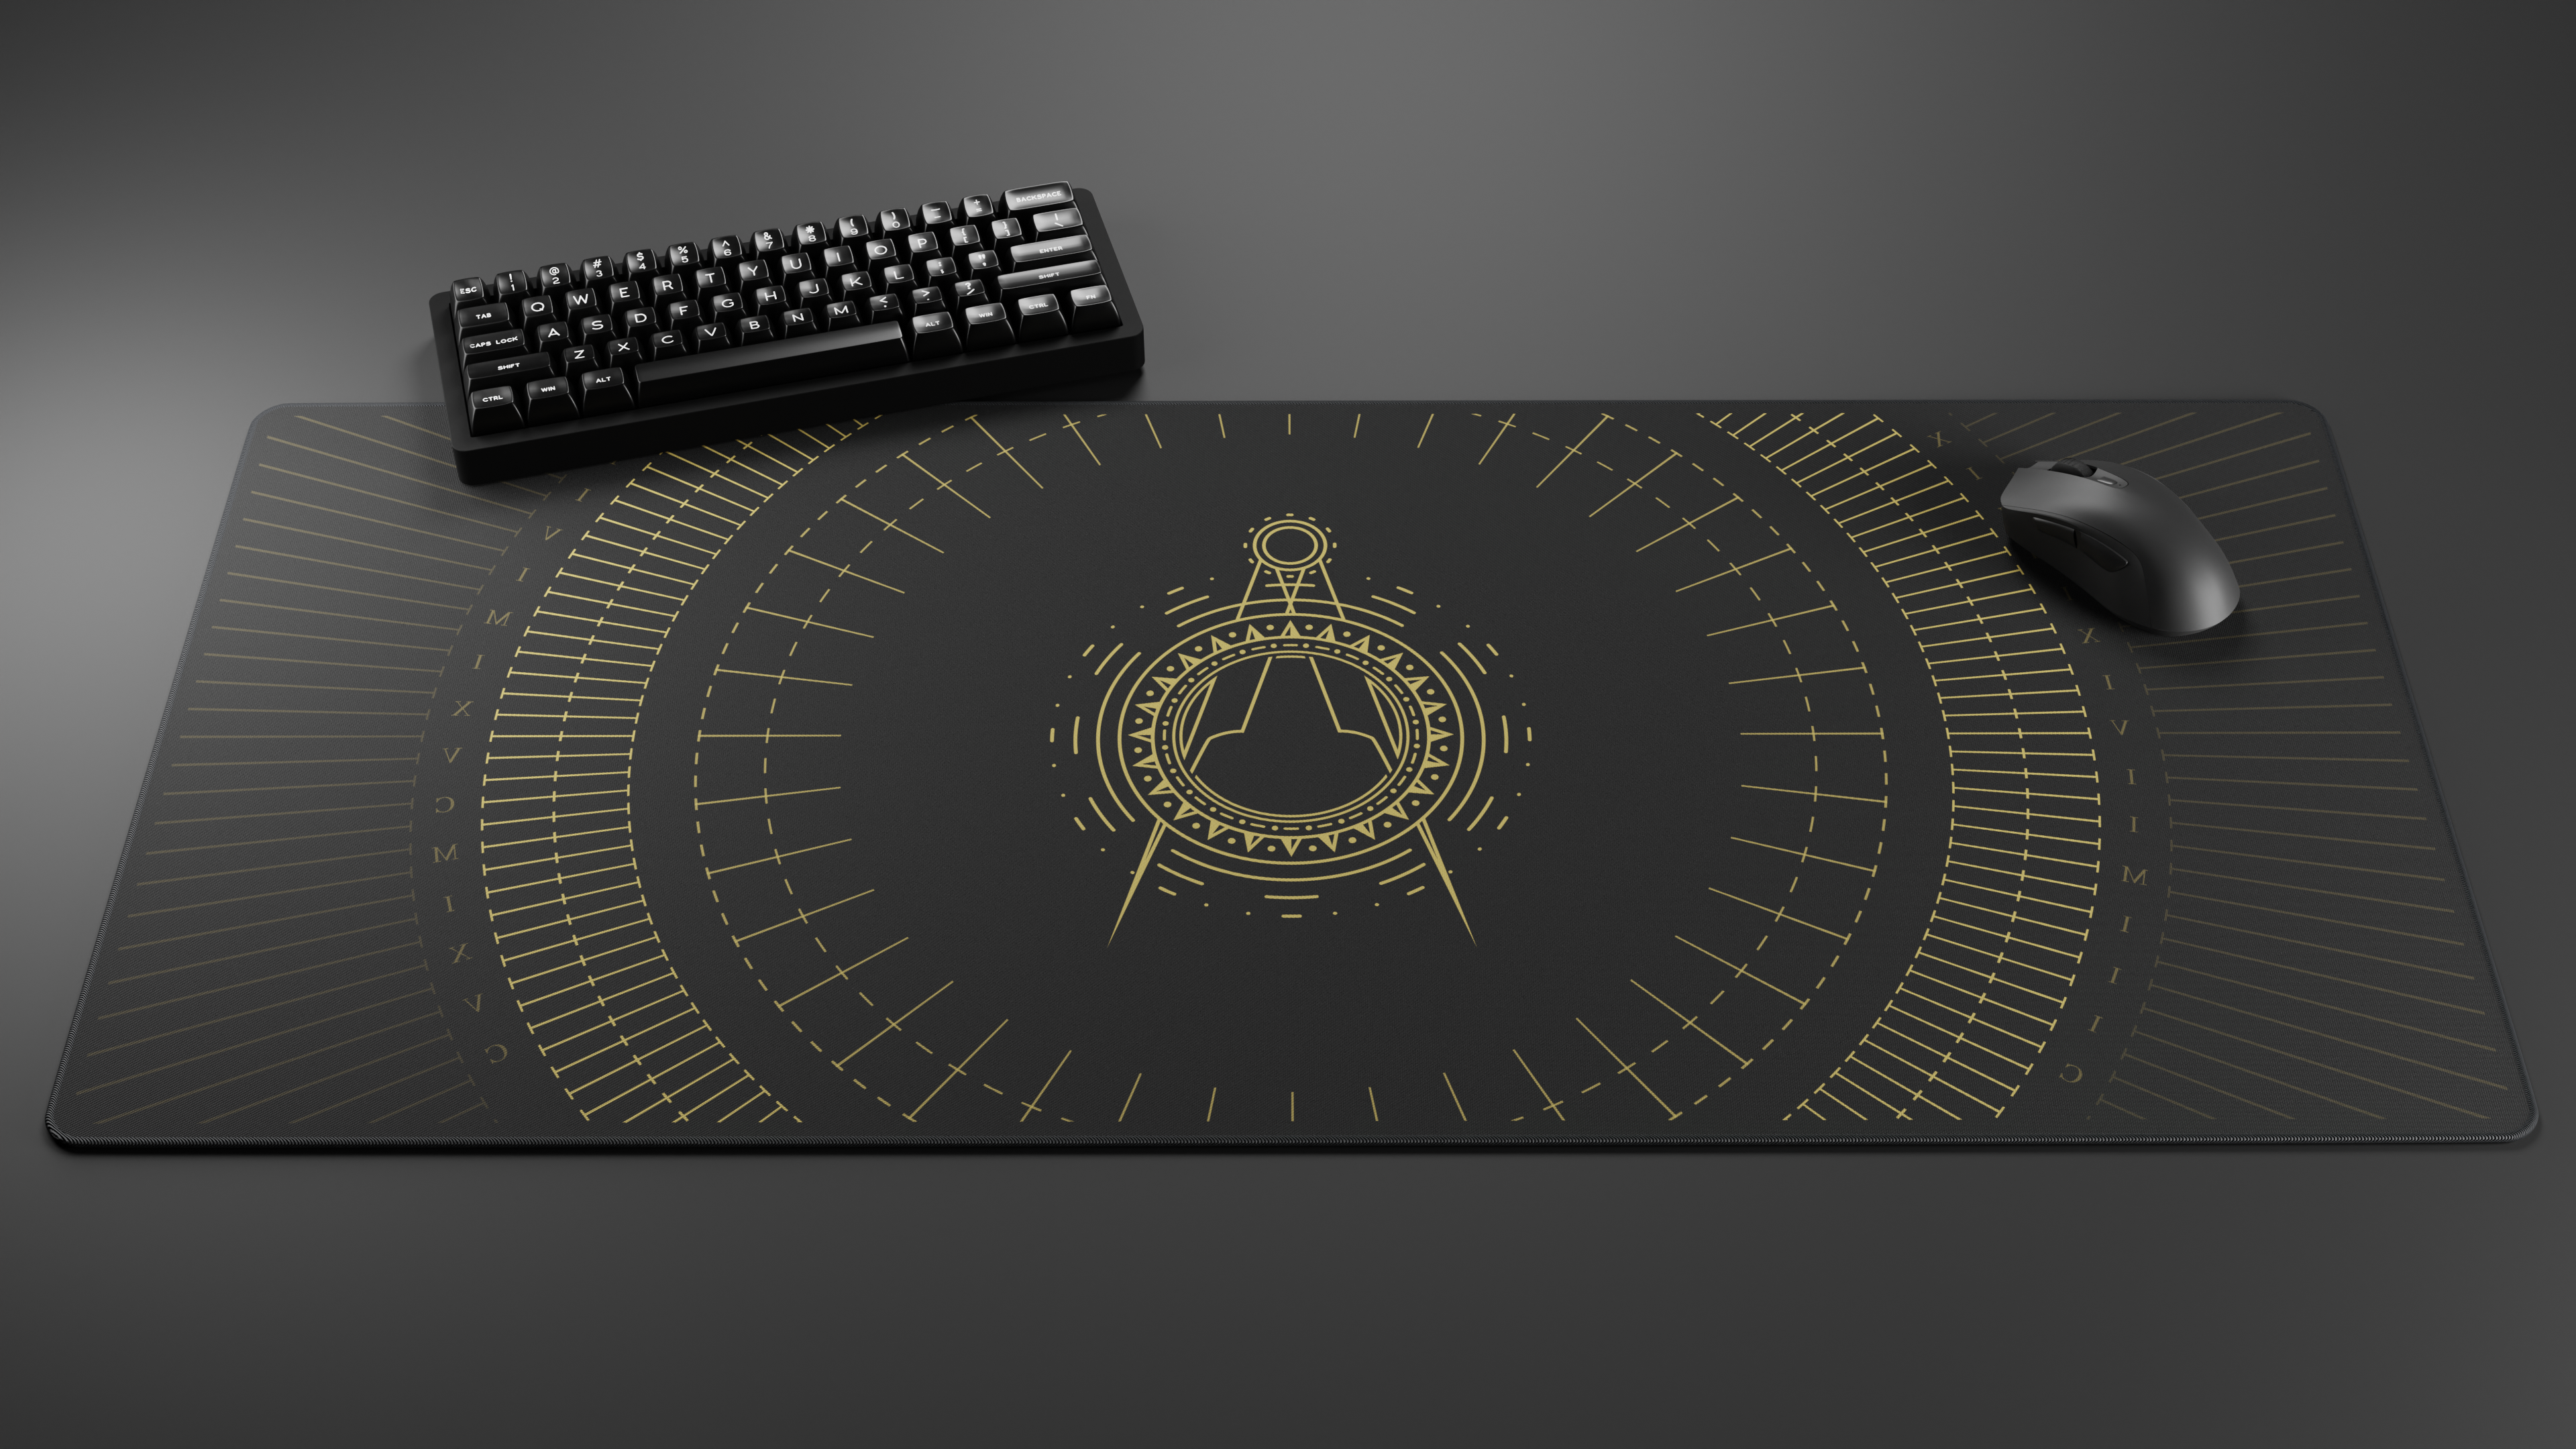 Deskmat 'Codex Collection - Geometry' by glutch